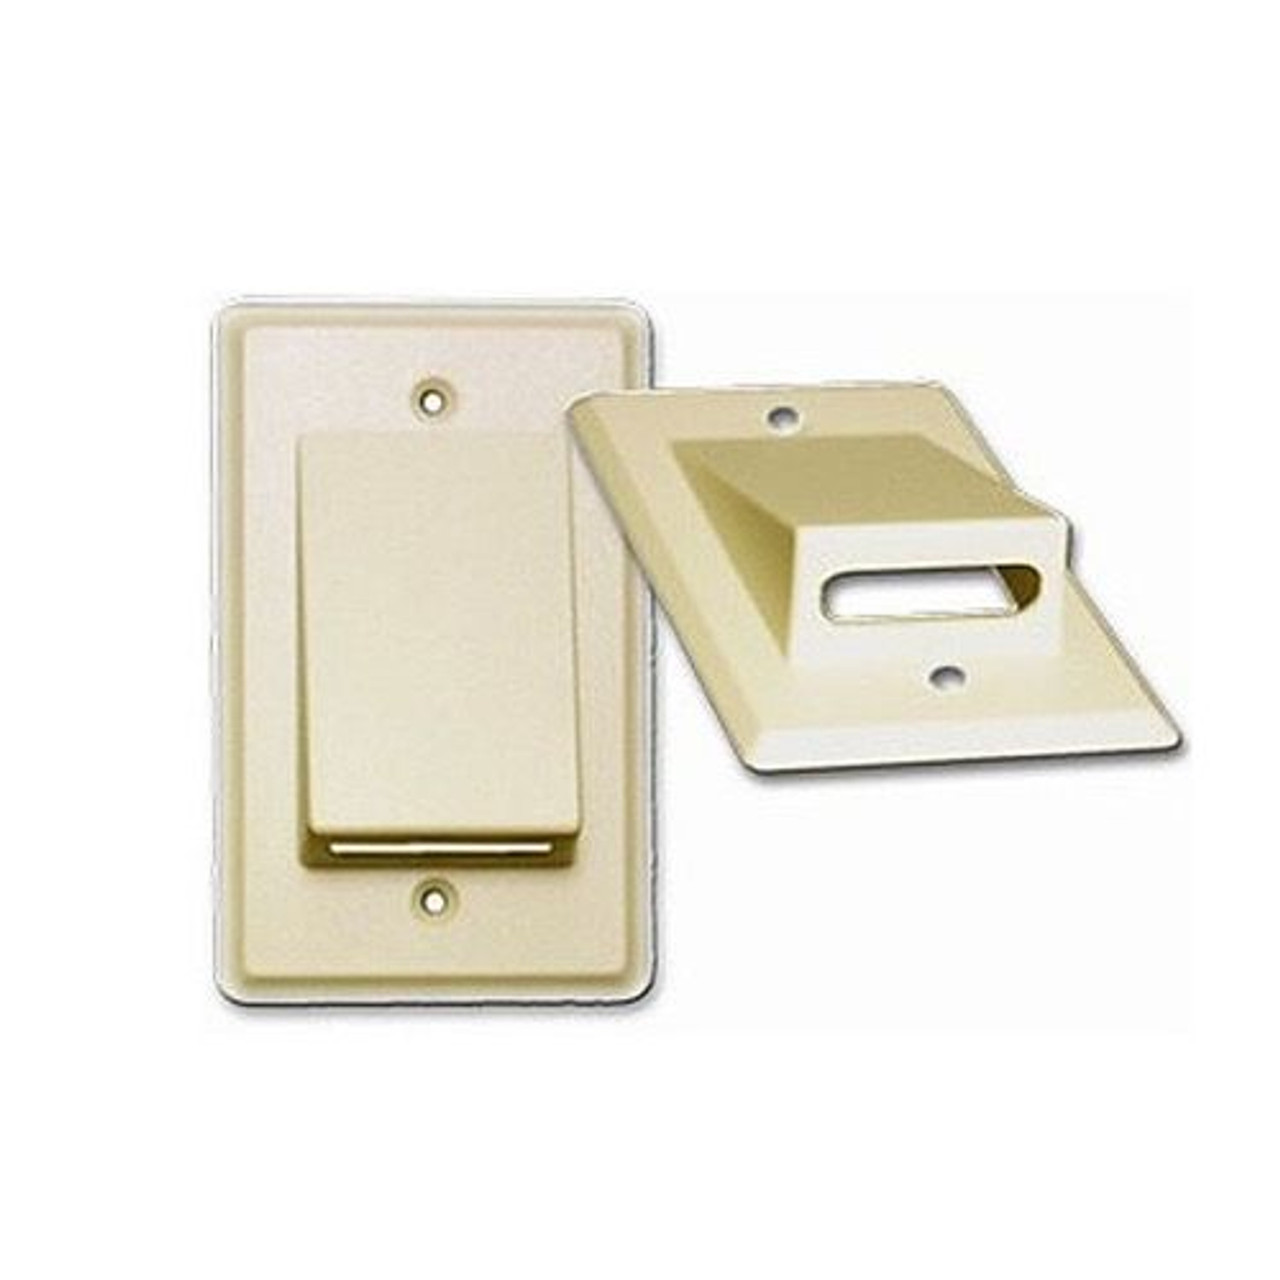 Eagle Wall Plate Cable Ivory Bulk Flat Ribbon Relaxed QuickPort Keystone and Multiple Flush Mount, Audio Video Data Junction Component Wide Pass-Through Opening Slot